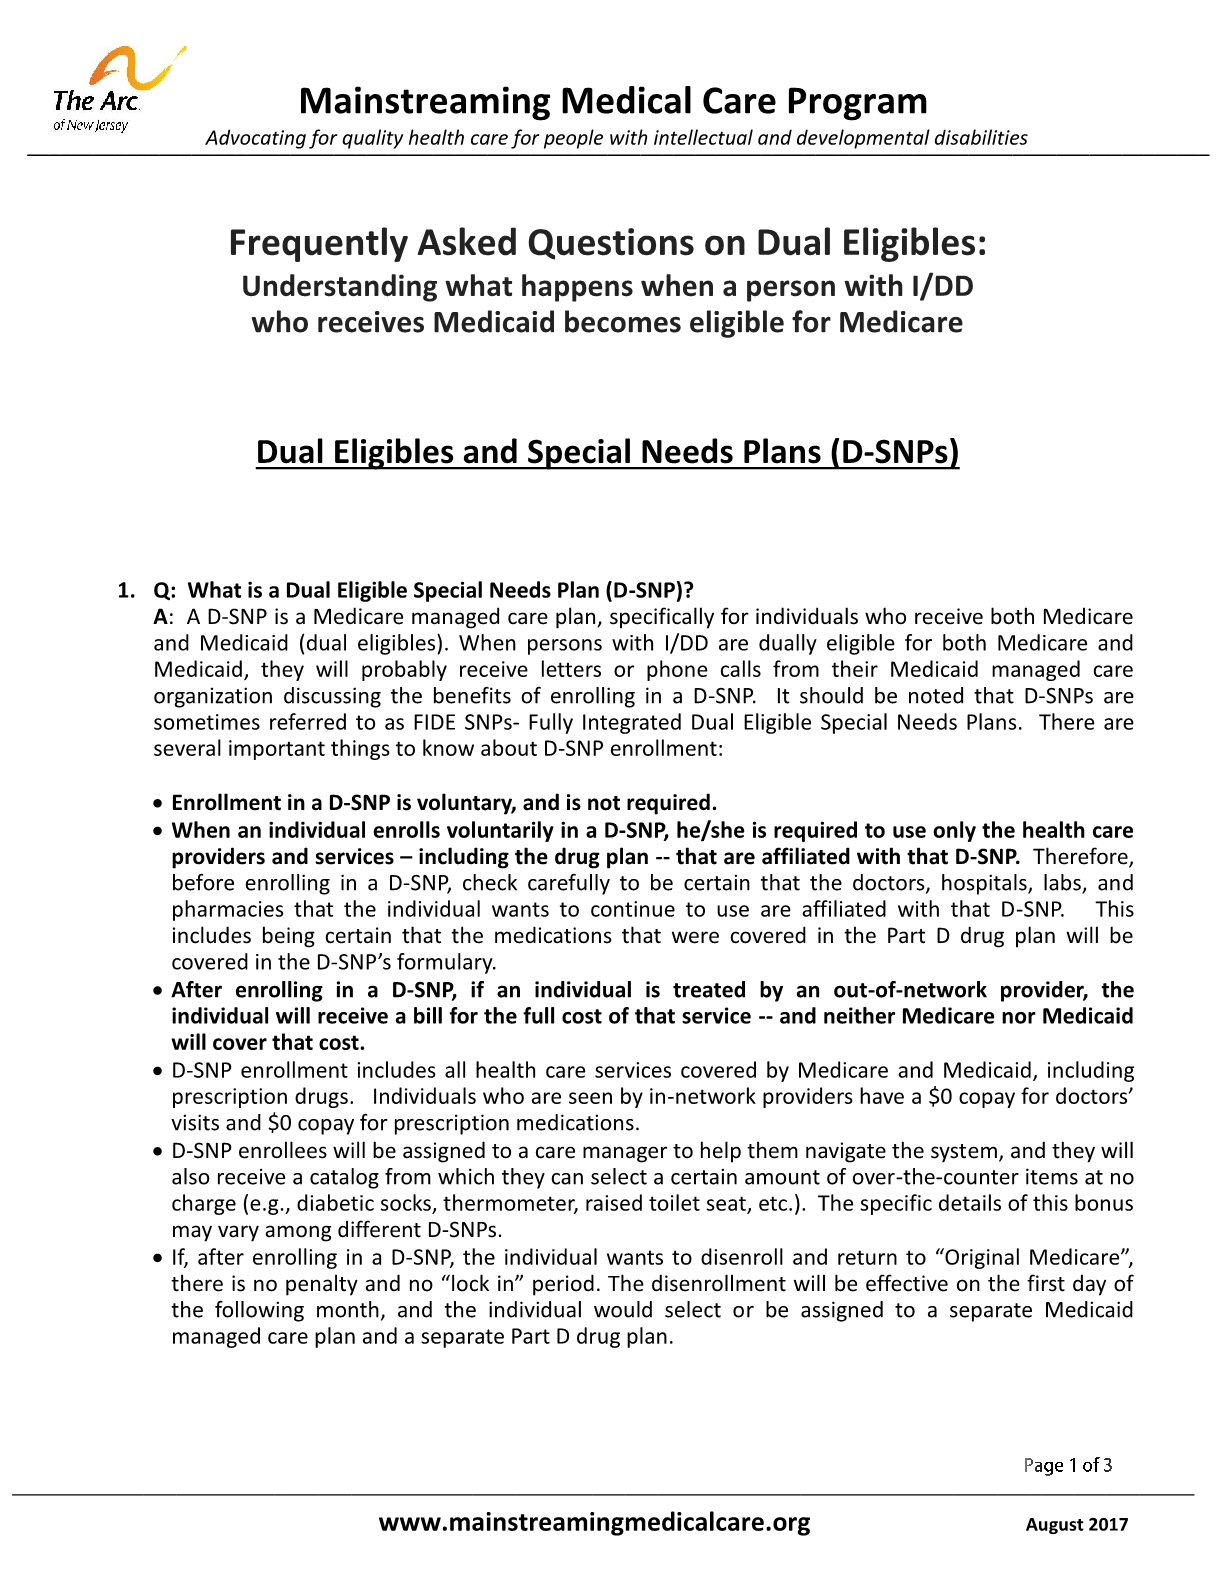 FAQ on Dual Eligibles: Understanding what happens when a person with IDD who receives Medicaid becomes eligible for Medicare - Dual Eligibles and Special Needs Plans (D-SNPs)